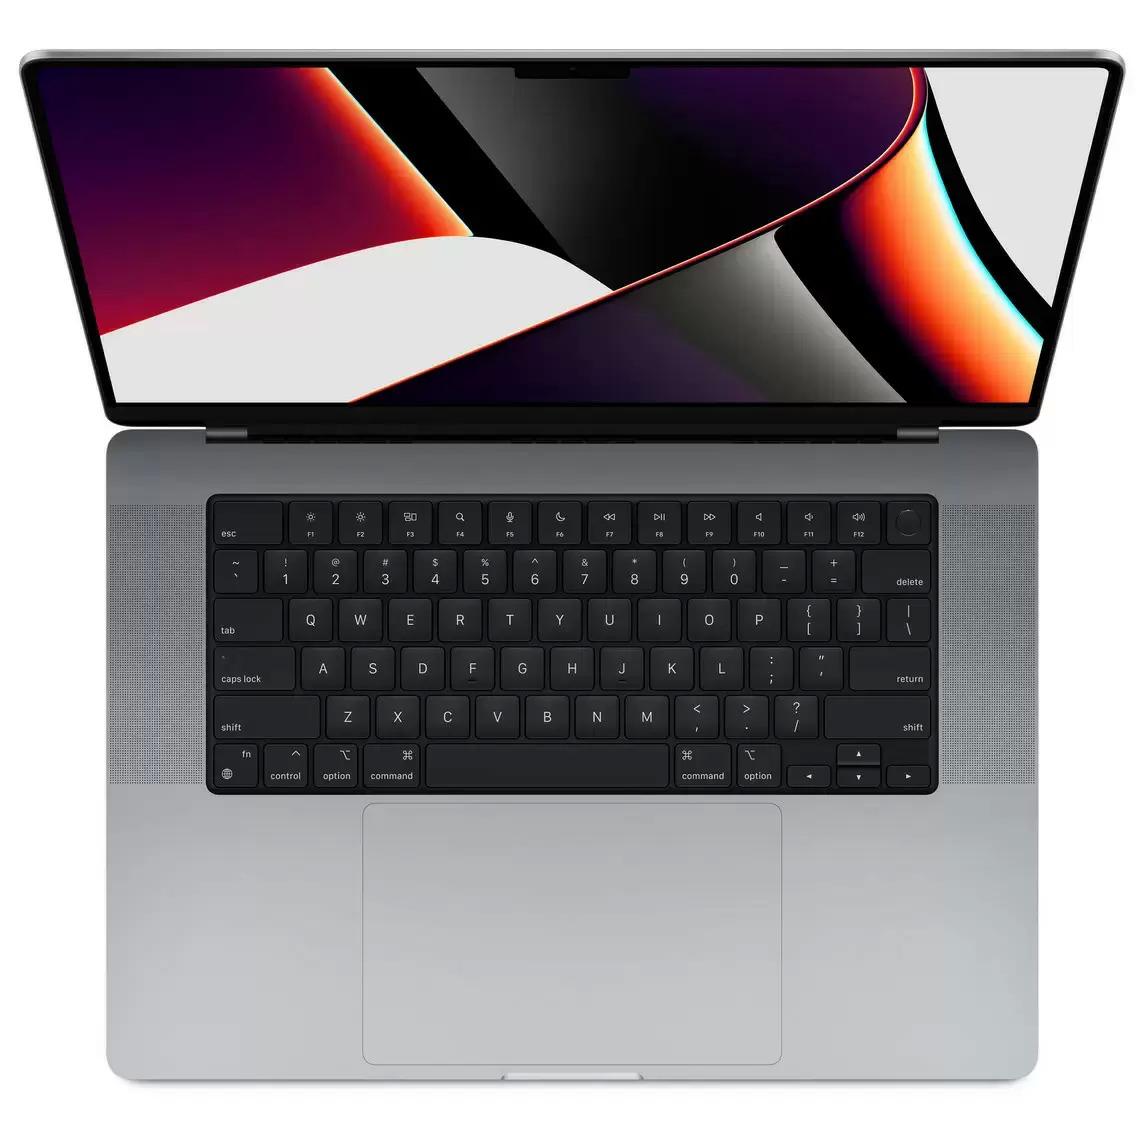 Apple 16in MacBook Pro M1 Pro 16GB 512GB Notebook Laptop for $1249.99